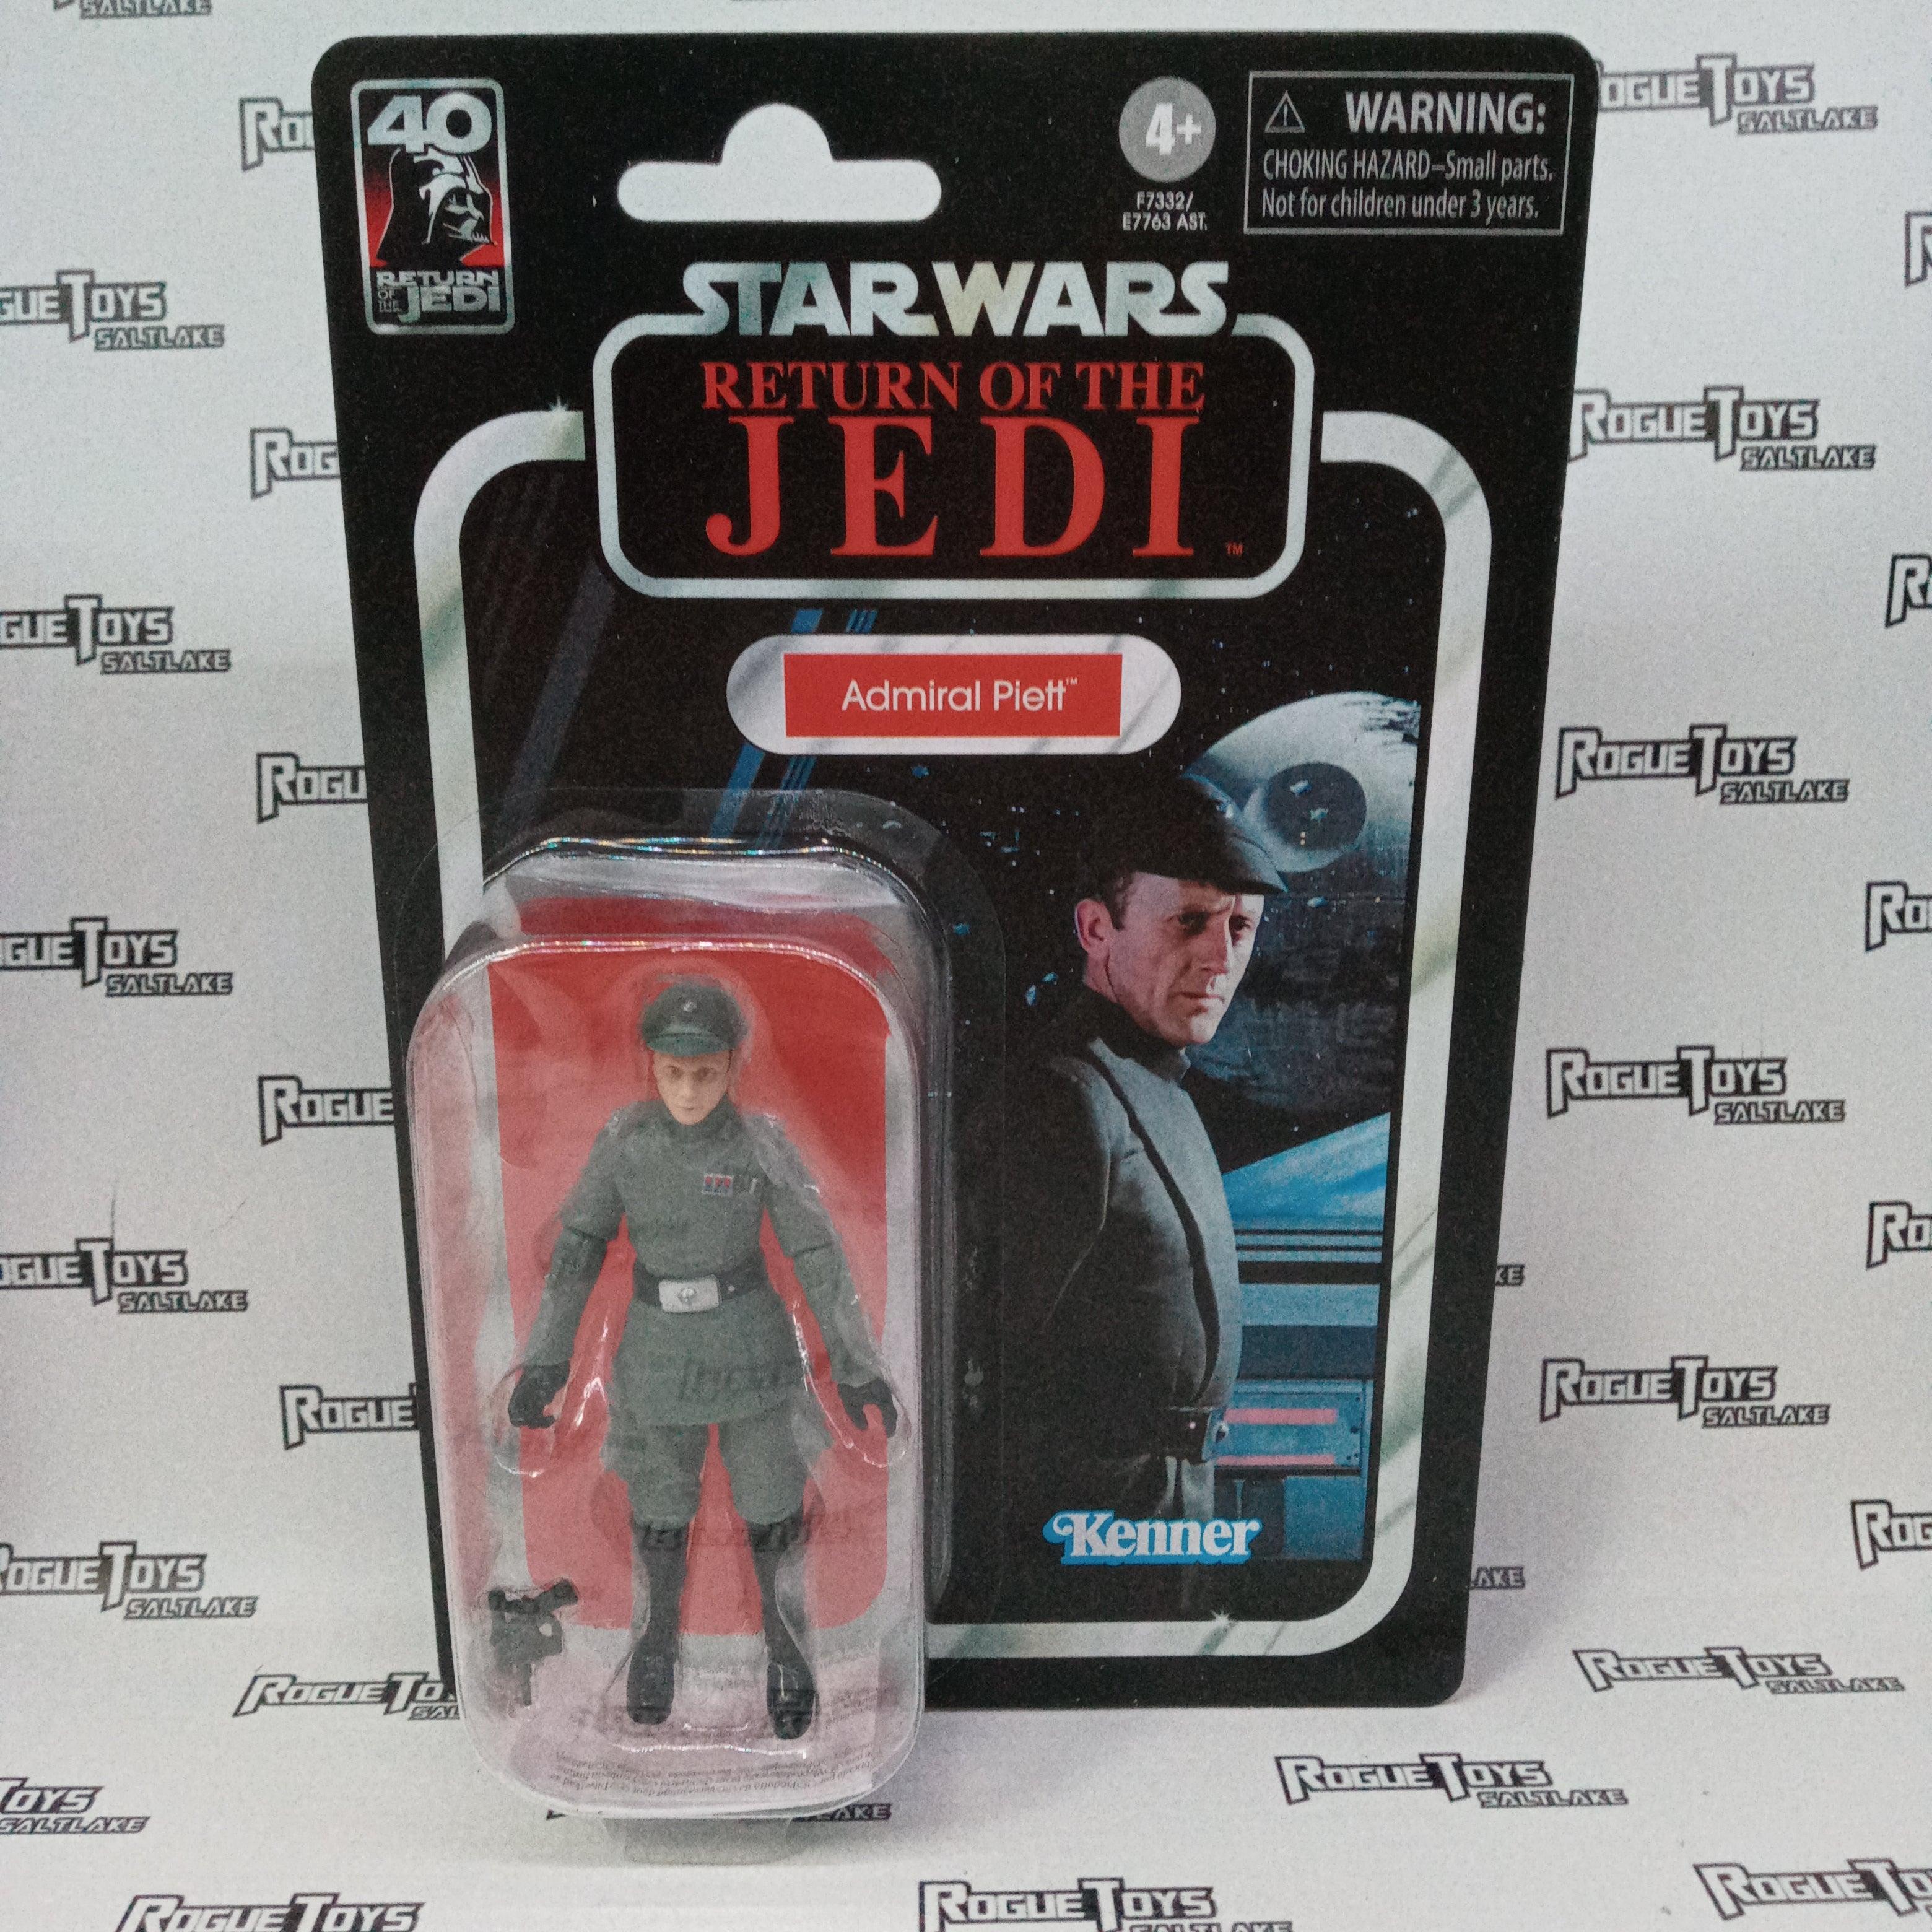 Hasbro Star Wars The Vintage Collection Return Of The Jedi Admiral Piett - Rogue Toys